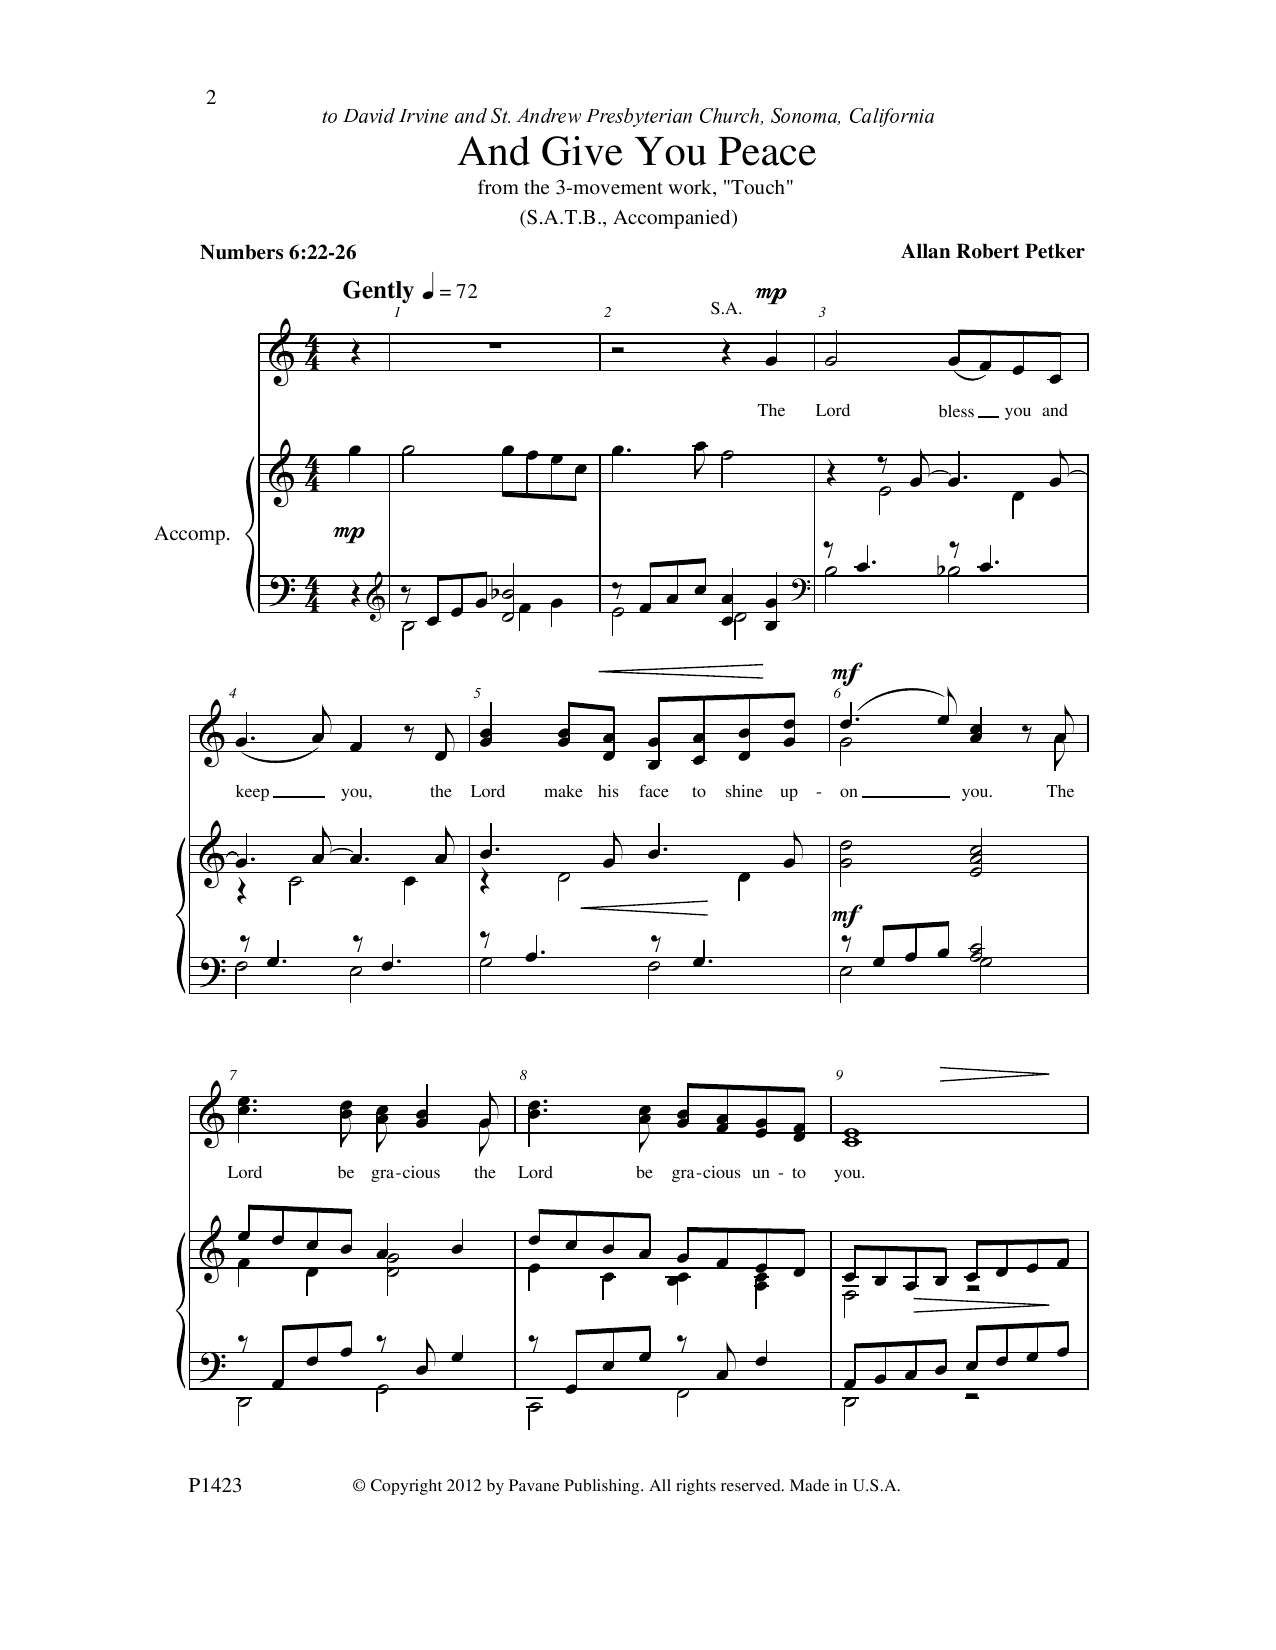 Download Allan Robert Petker And Give You Peace Sheet Music